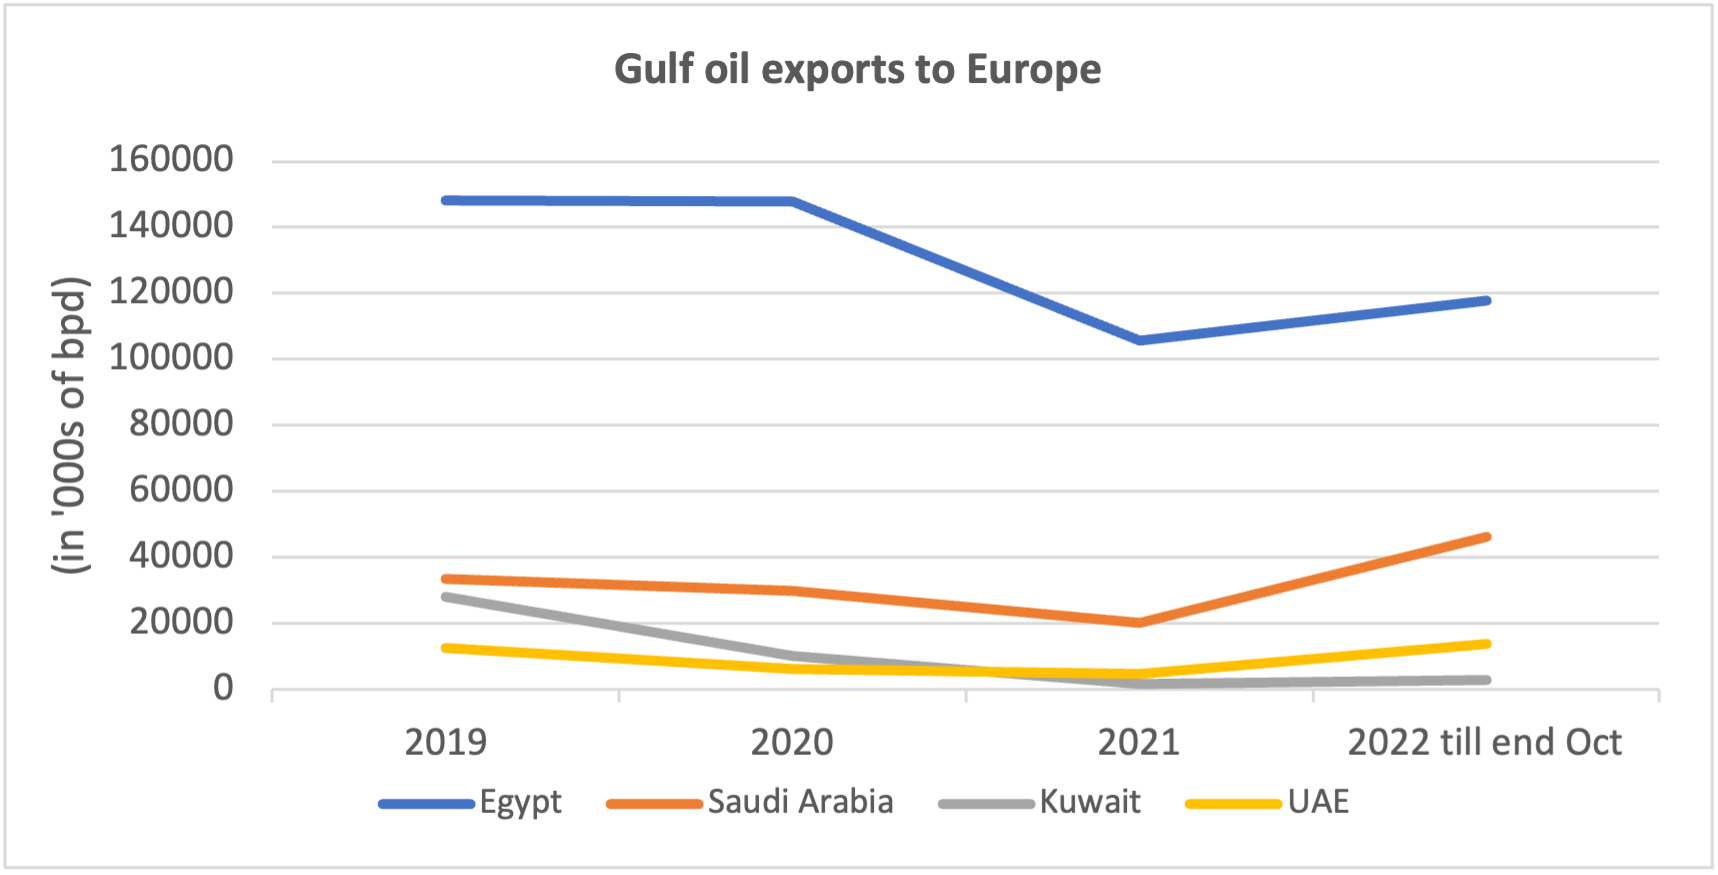 Gulf oil exports to Europe